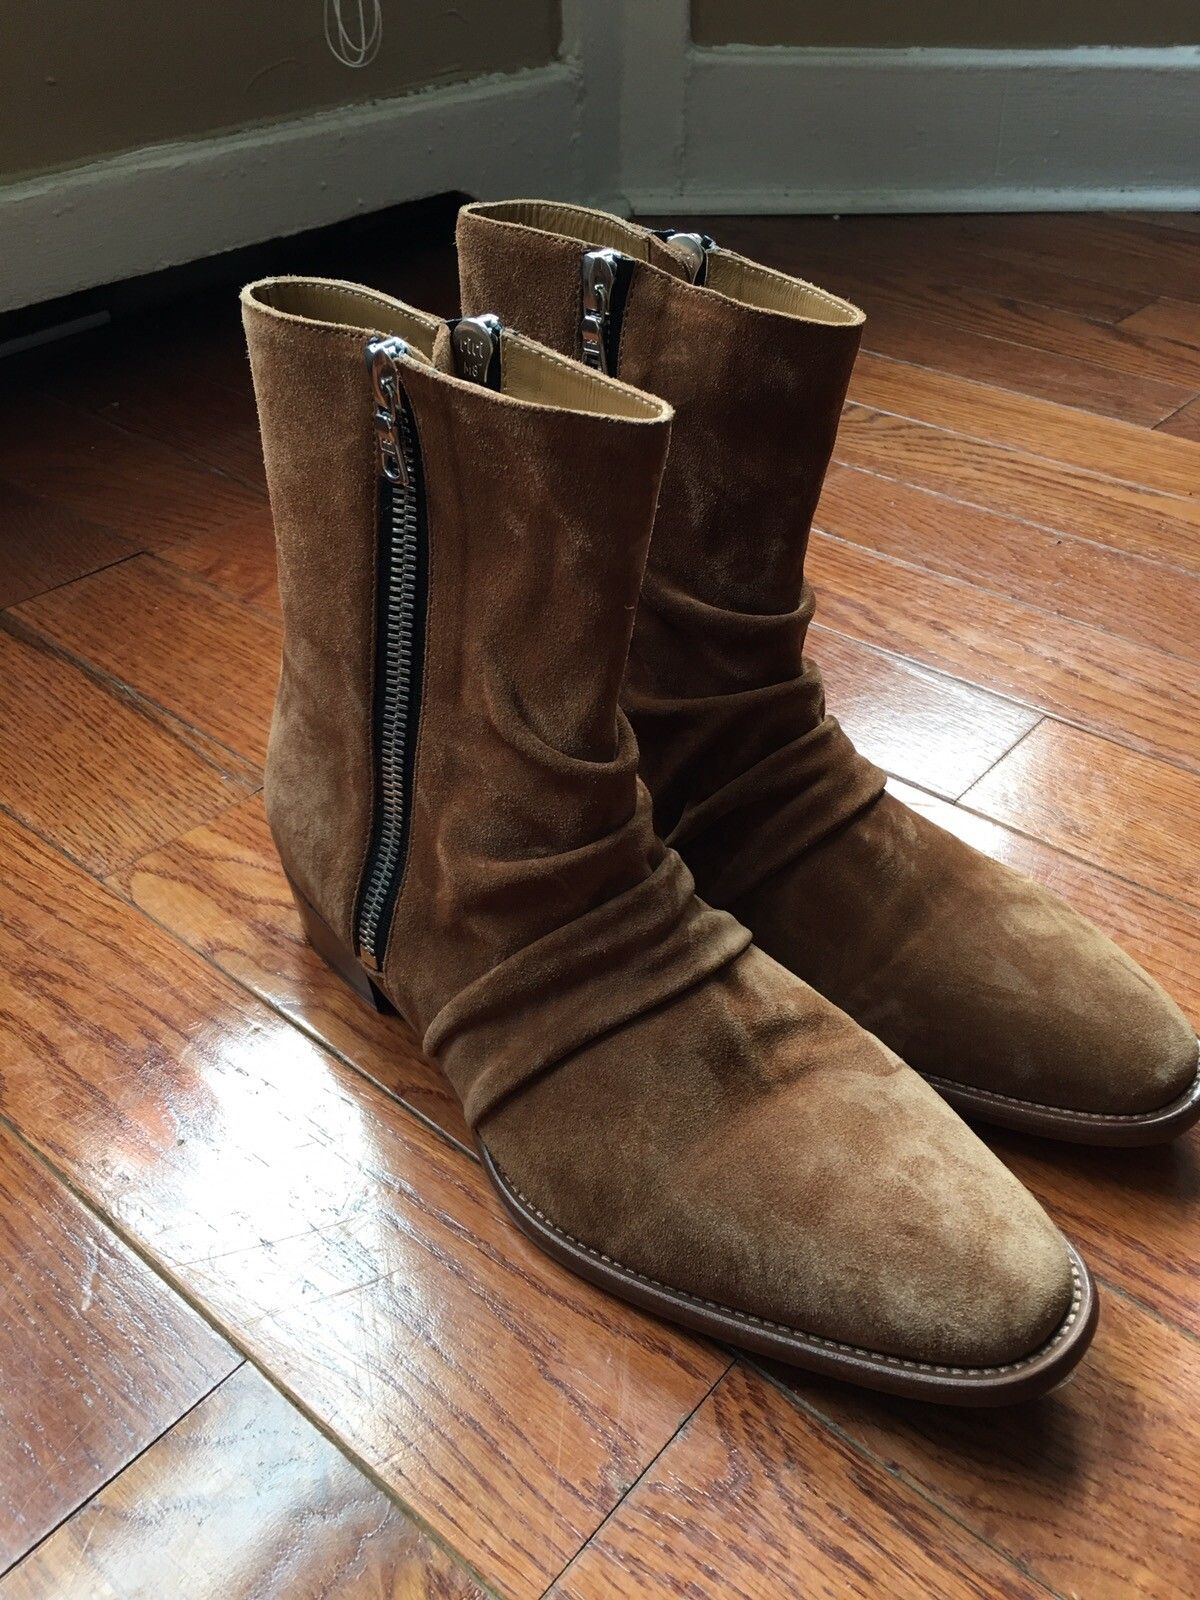 Amiri Stack Boots in Null, Men's (Size 10) Product Image